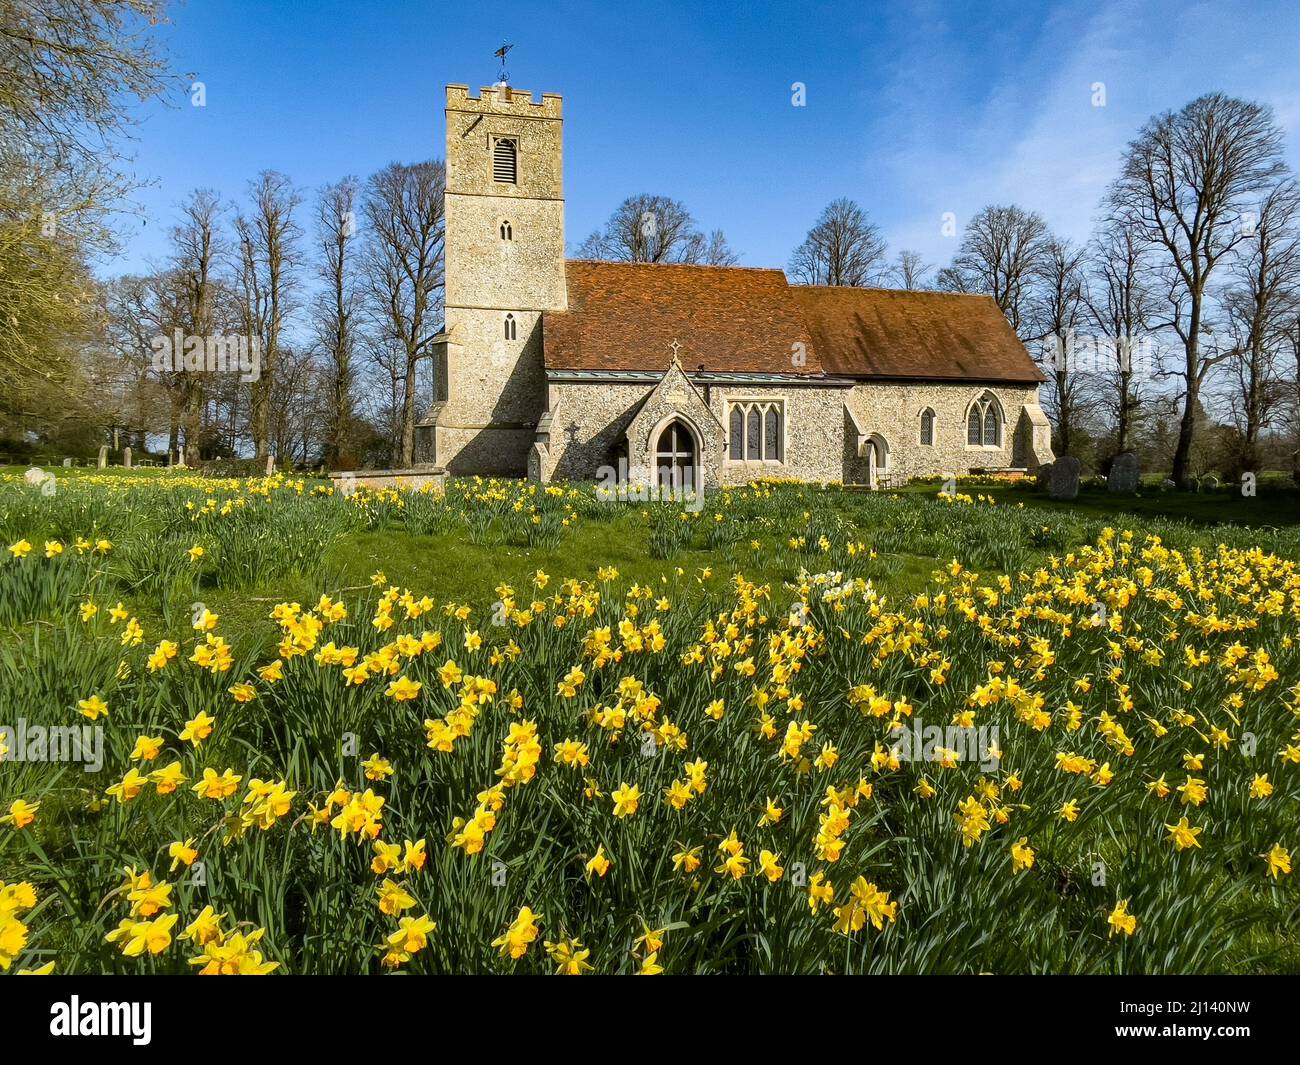 Field of Daffodils in bloom in front of  All Saints  Church Rickling, Essex UK against a clear blue sky, Essex, UK. Stock Photo